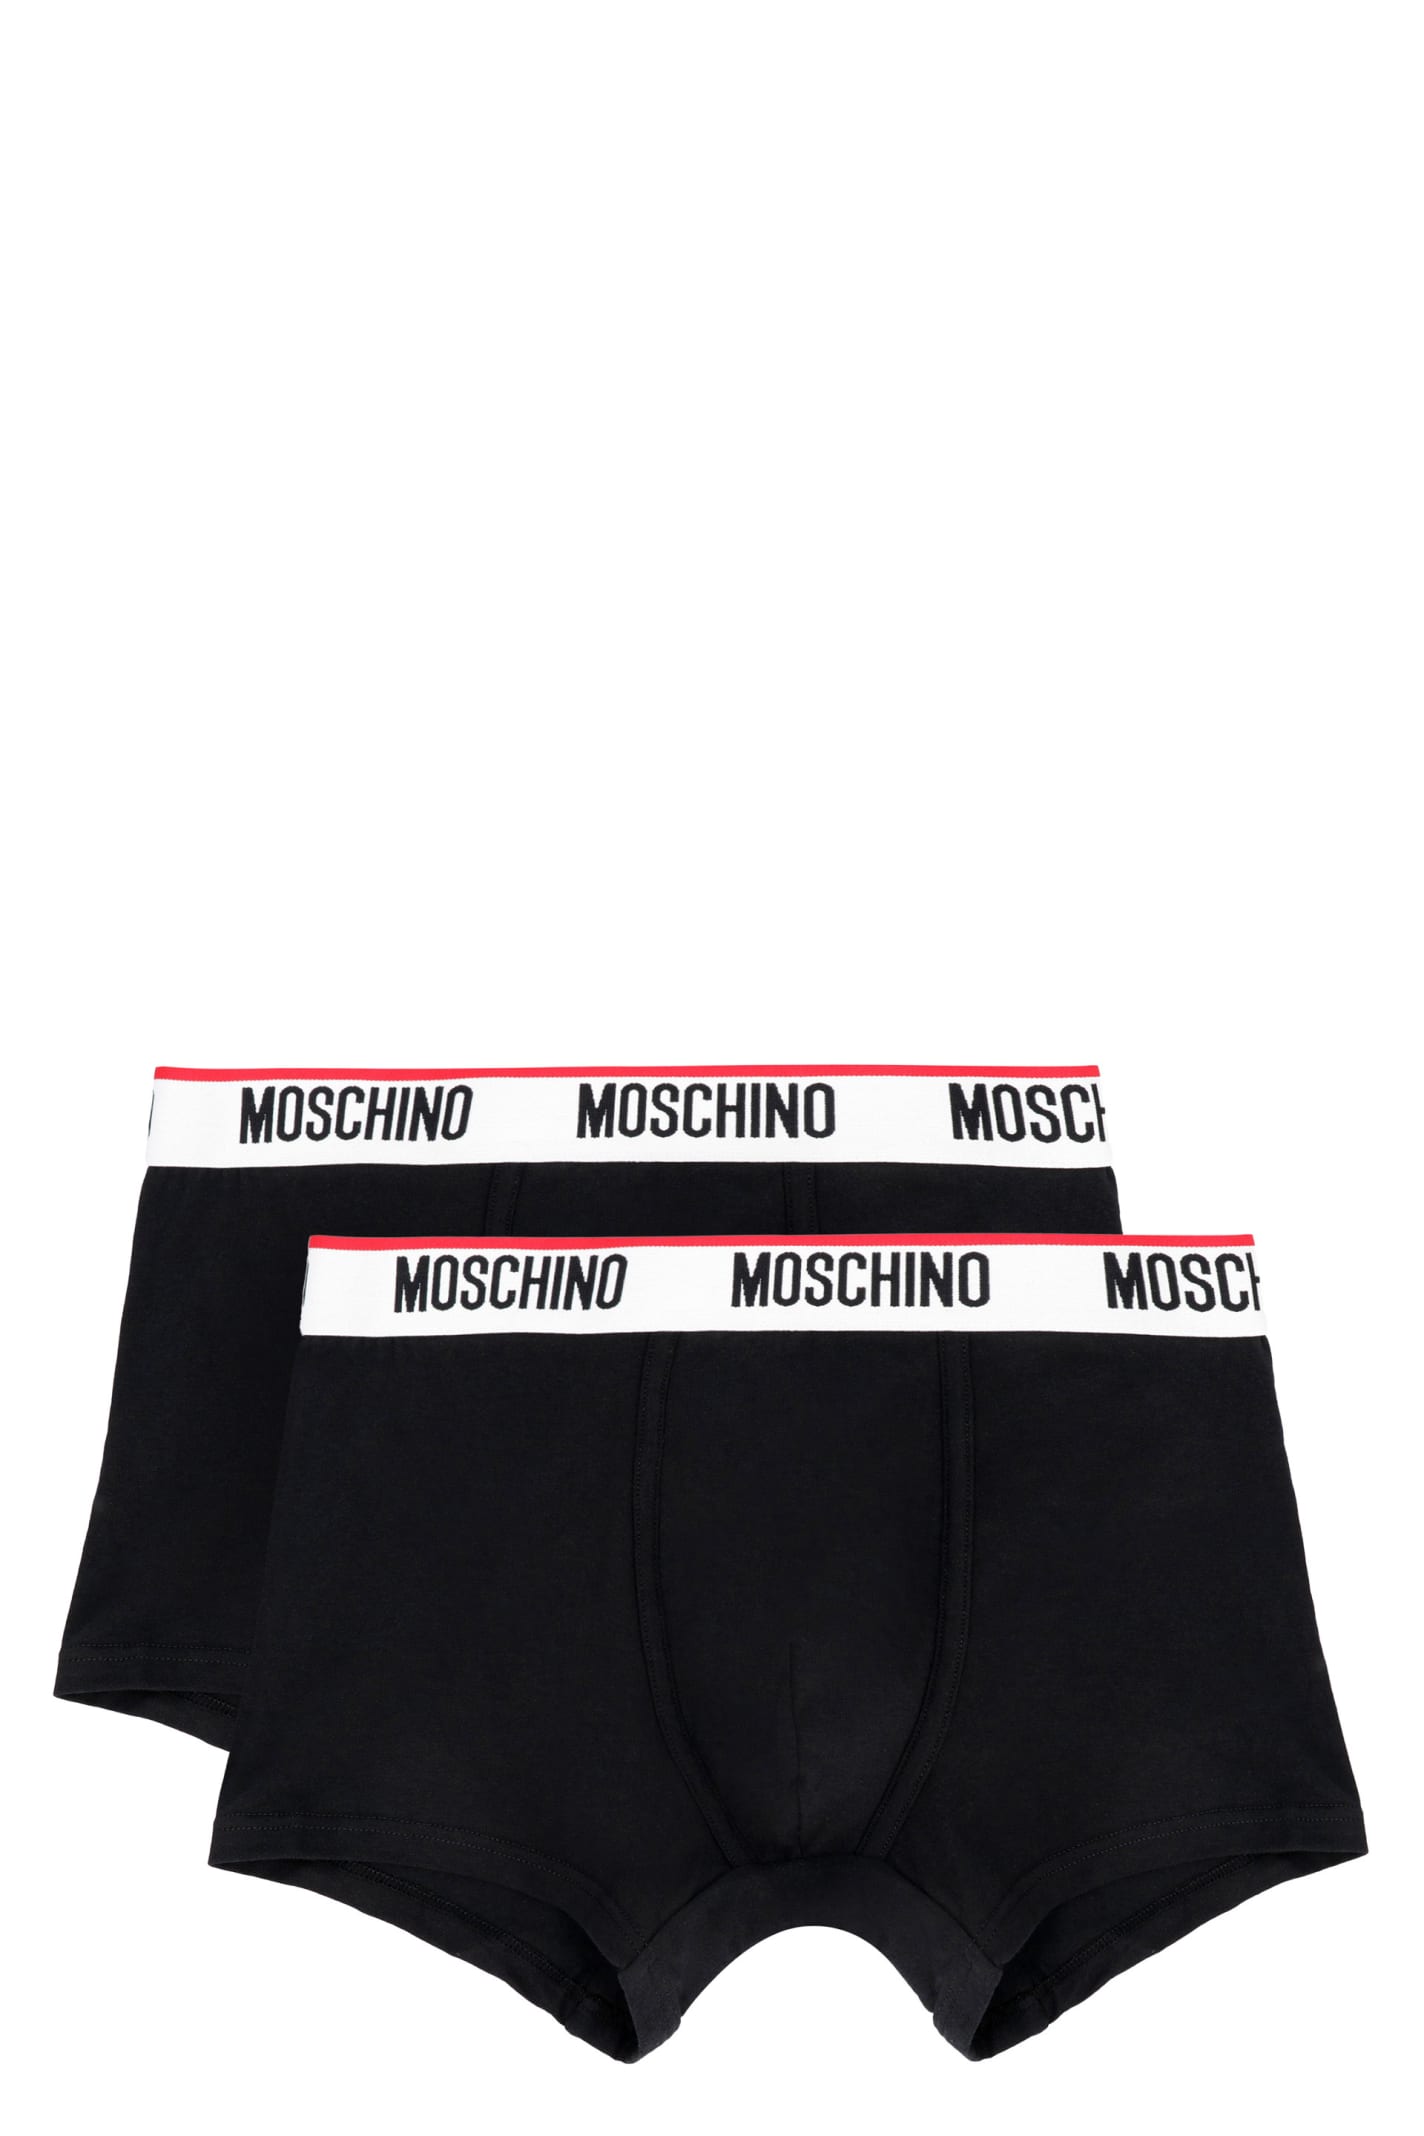 Moschino Set Of Two Cotton Trunks With Logoed Elastic Band